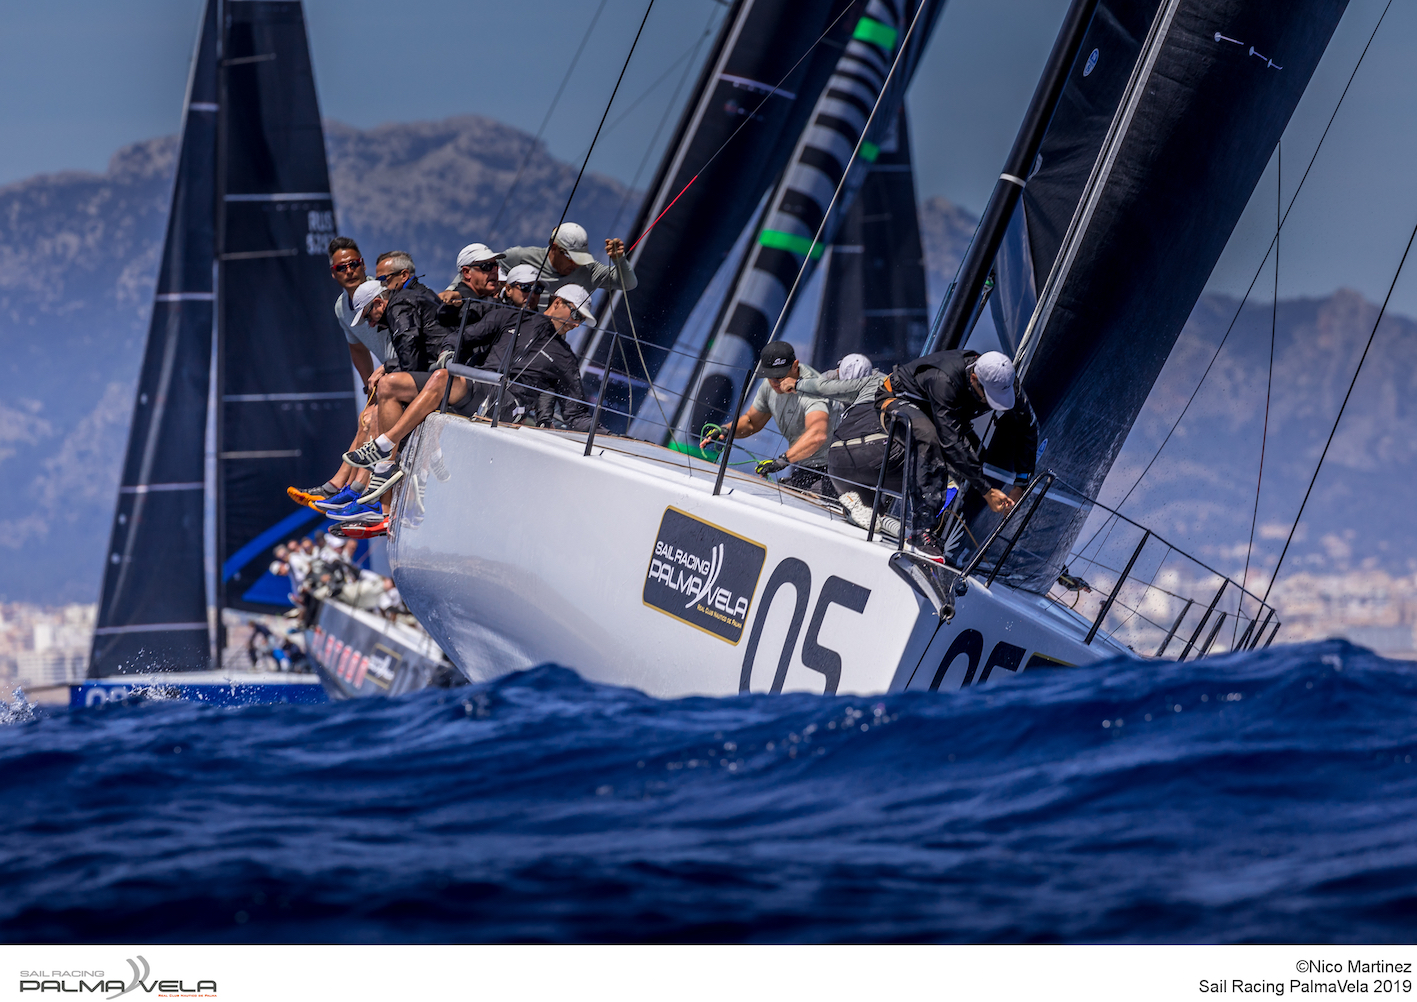  IRC, TP52, various boats  Palma Vela 2019  Palma de Mallorca ESP, Day 1  Sled USA leads in TP52s  and Magic Carpet 3 GBR in IRC